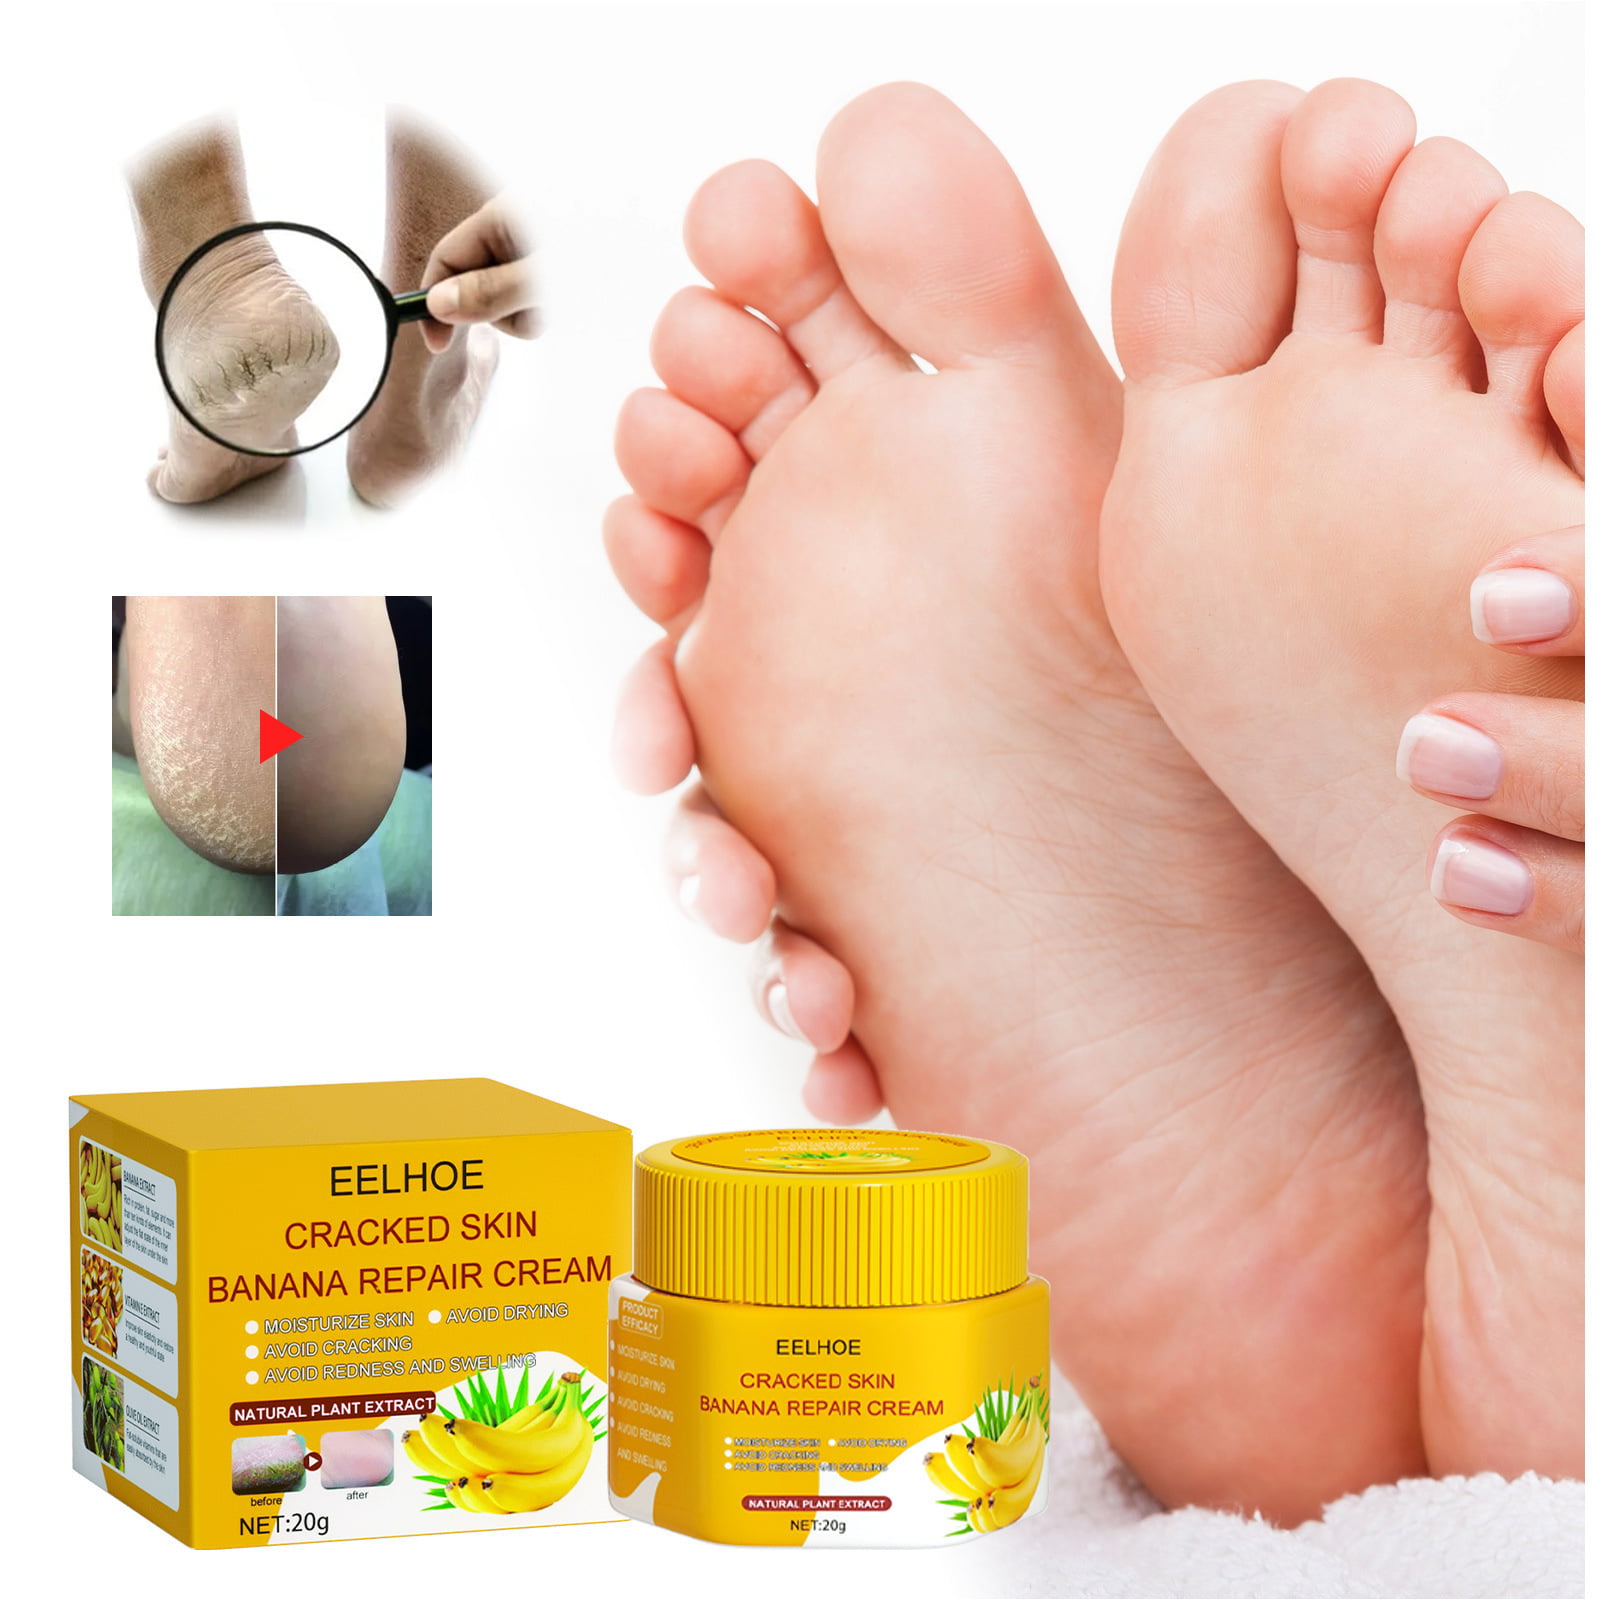 moha Foot care cream for cracked feet - YouTube